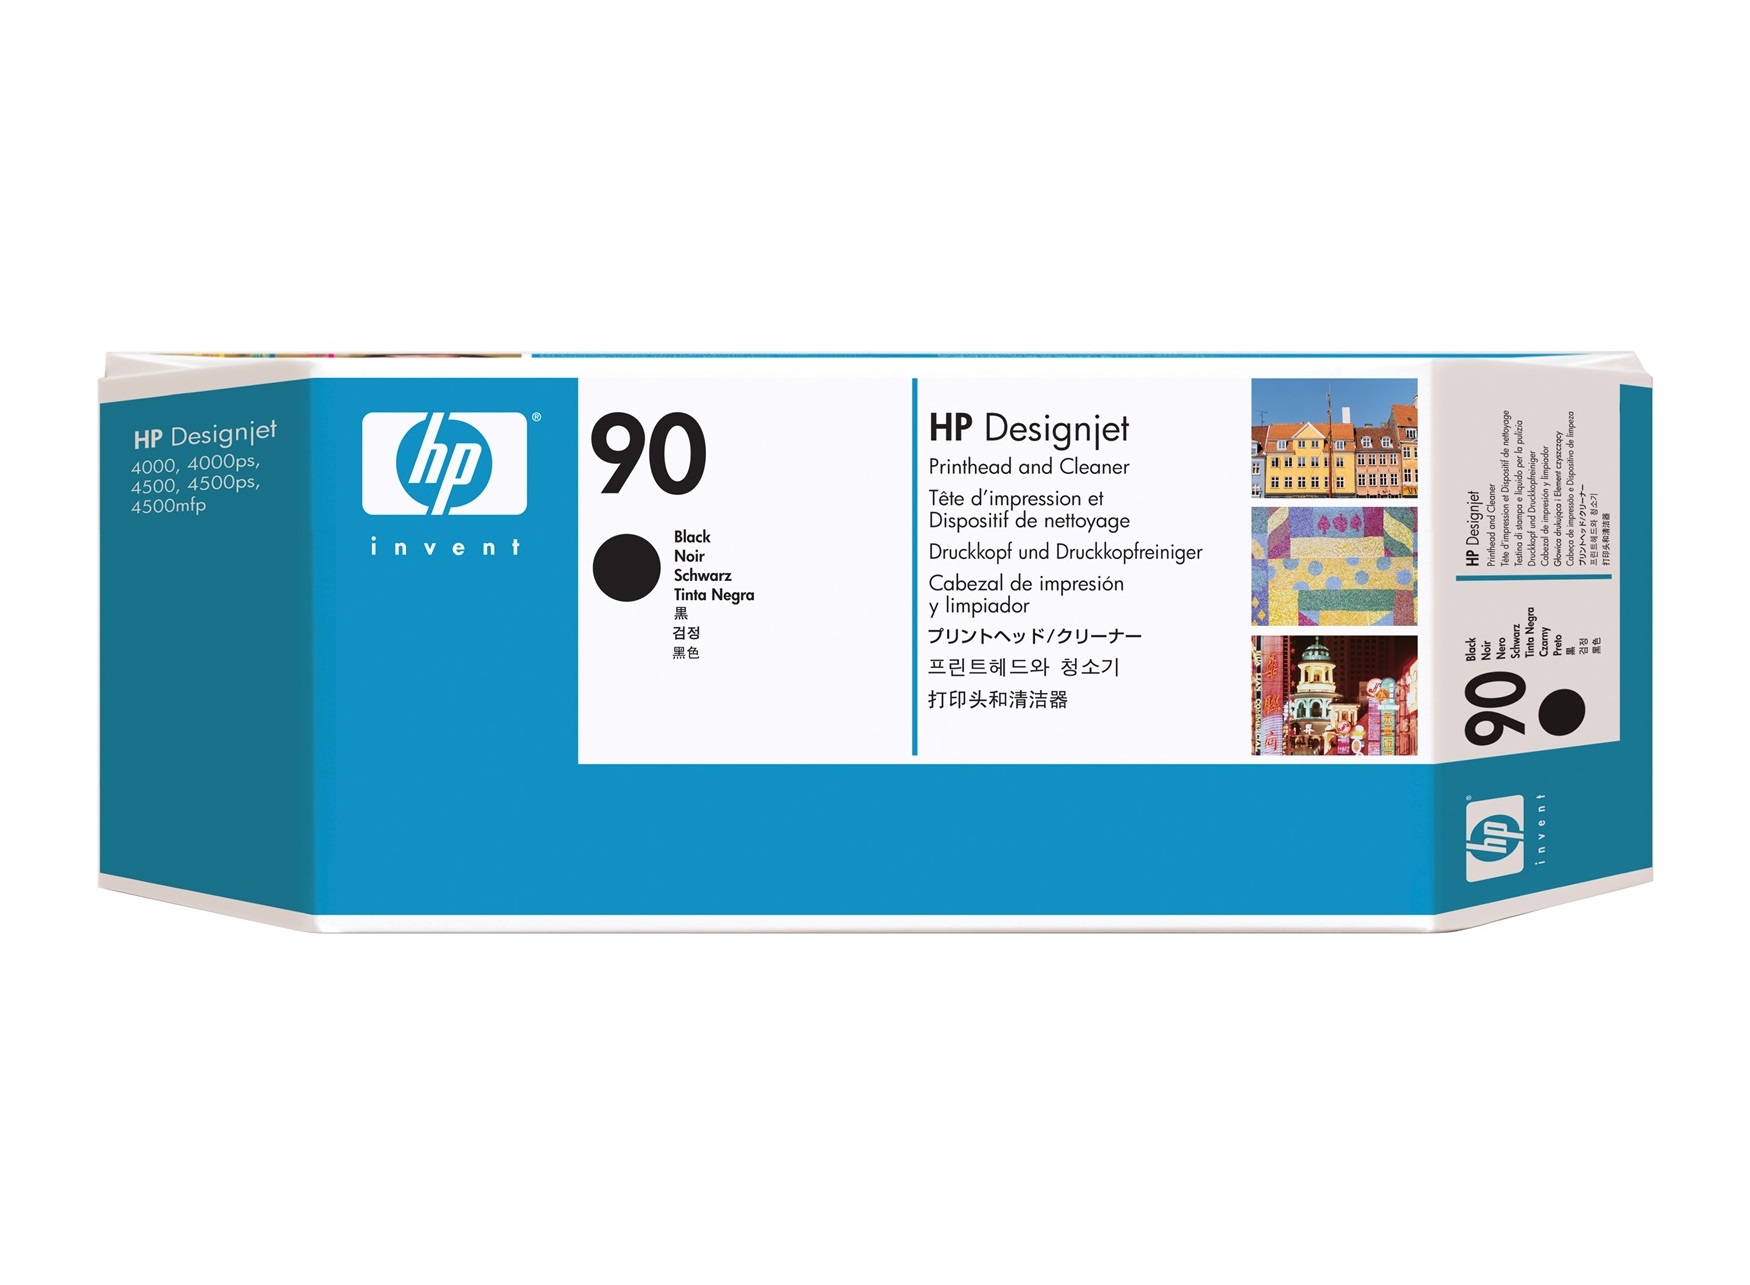 Related to 4000 PRINTER CARTRIDGES: C5054A